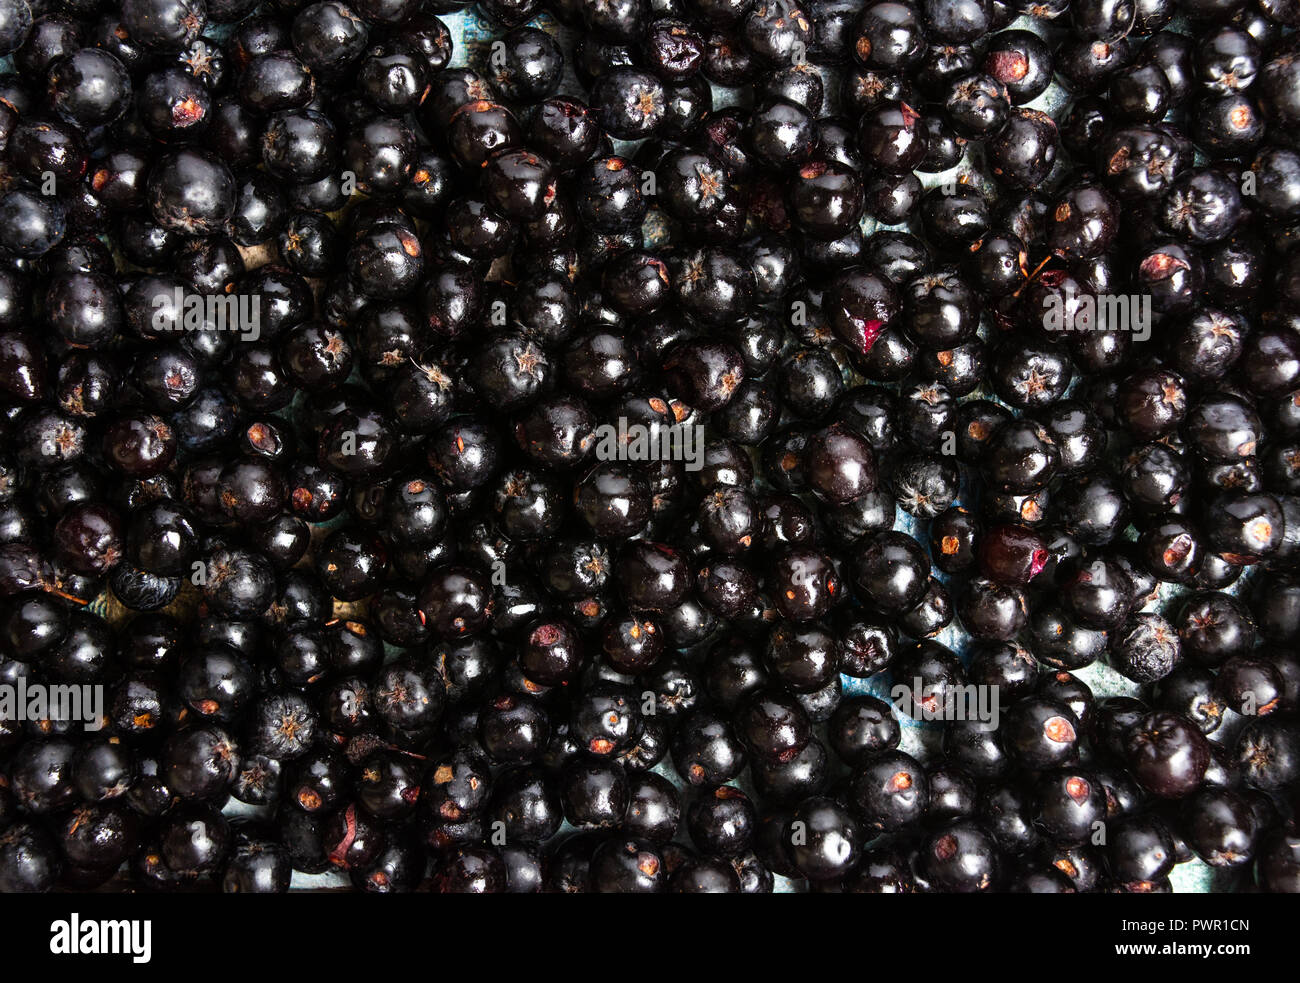 Aronia berries bunch making a background pattern Stock Photo